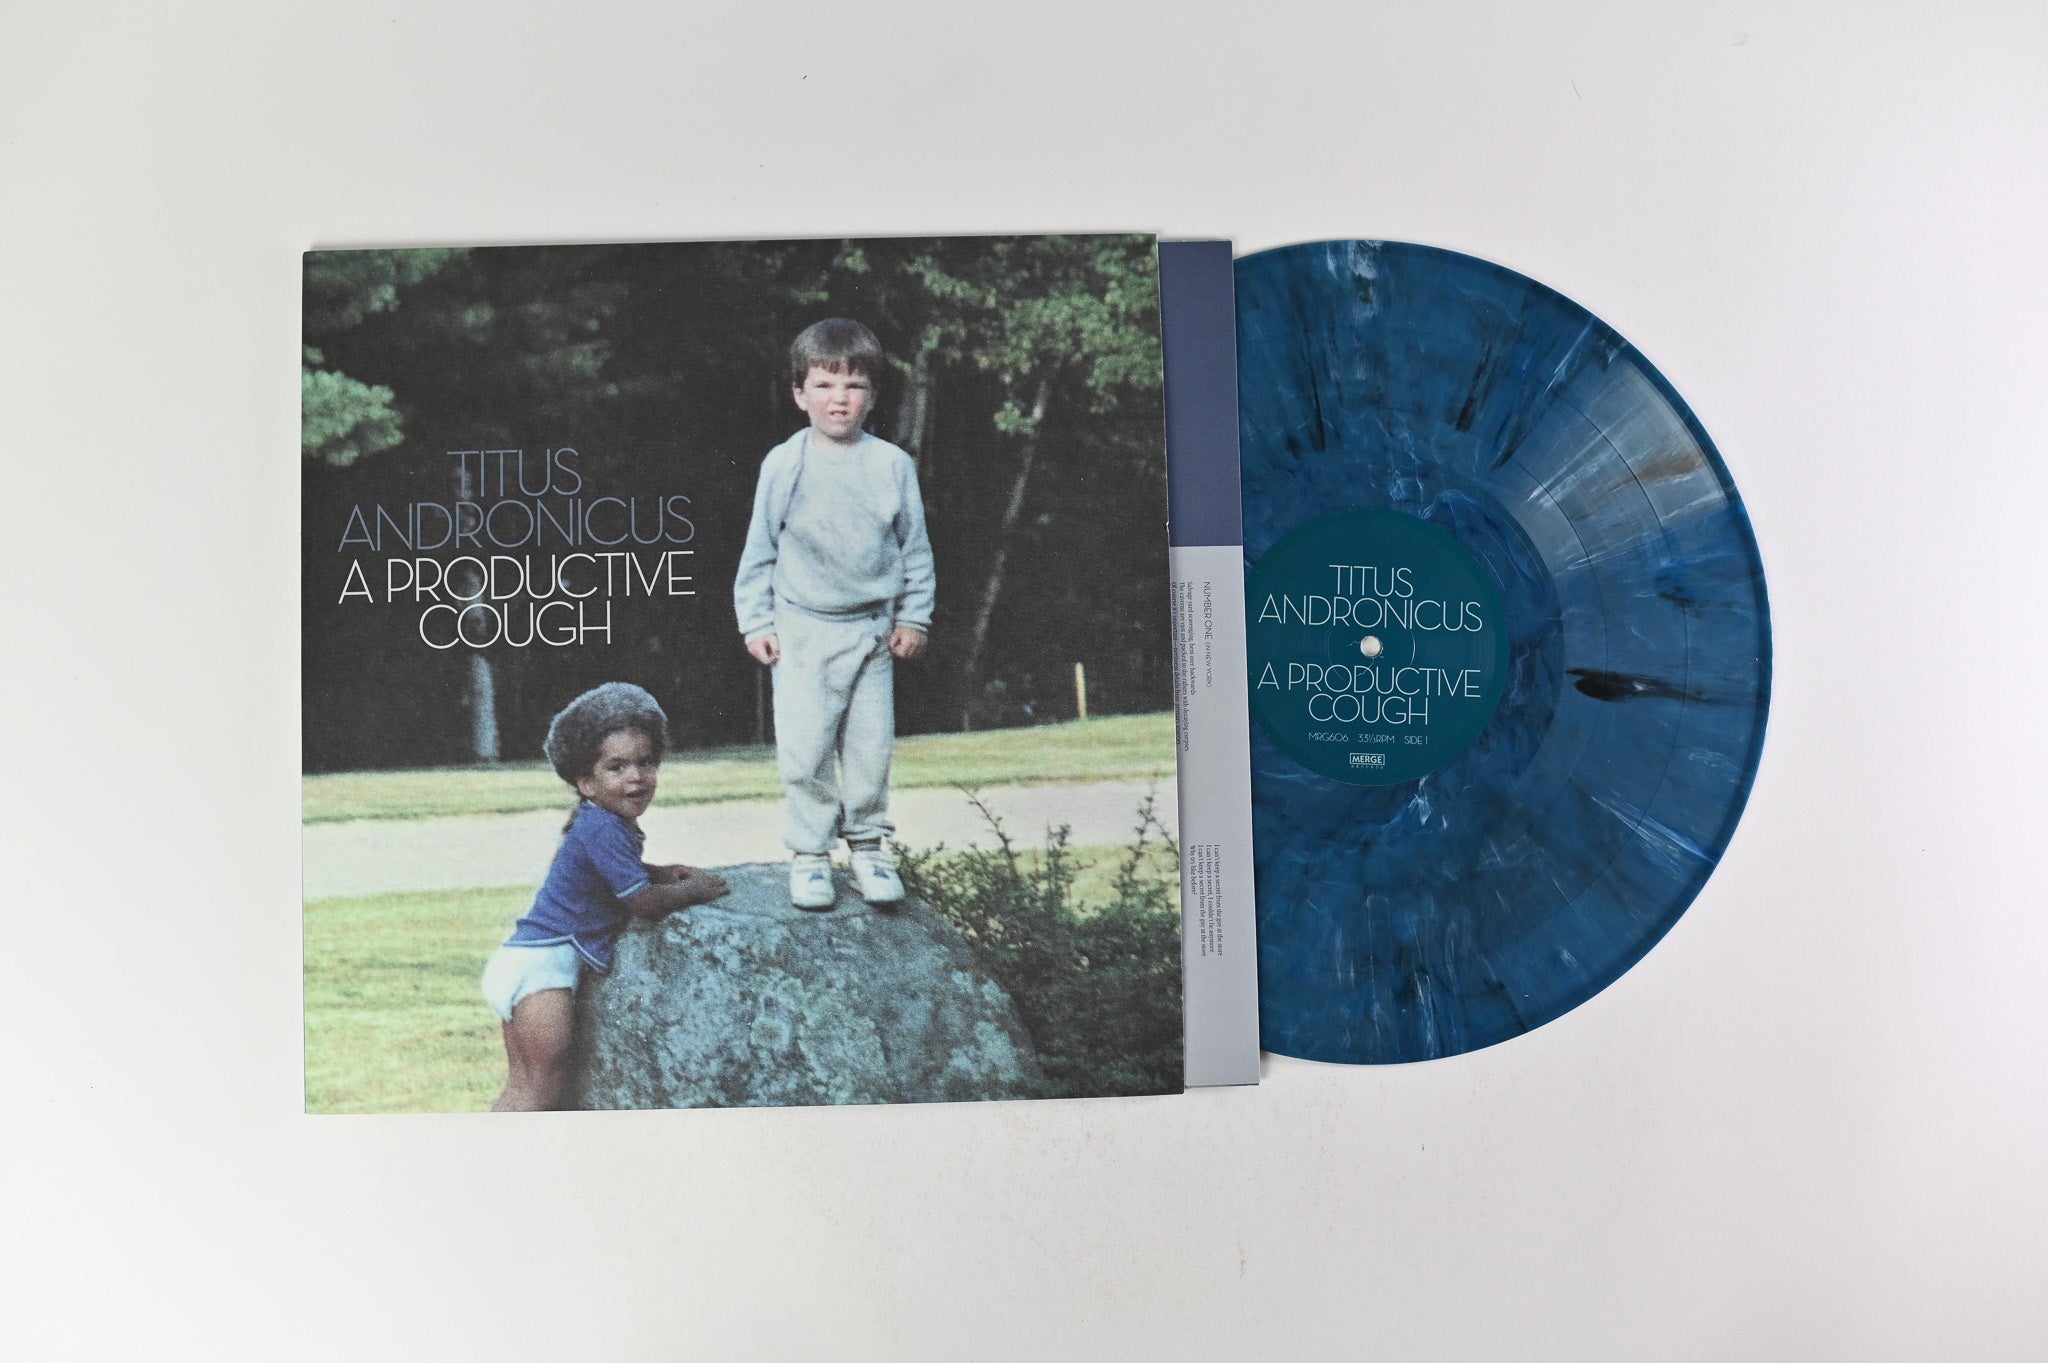 Titus Andronicus – A Productive Cough on Merge - Colored Vinyl